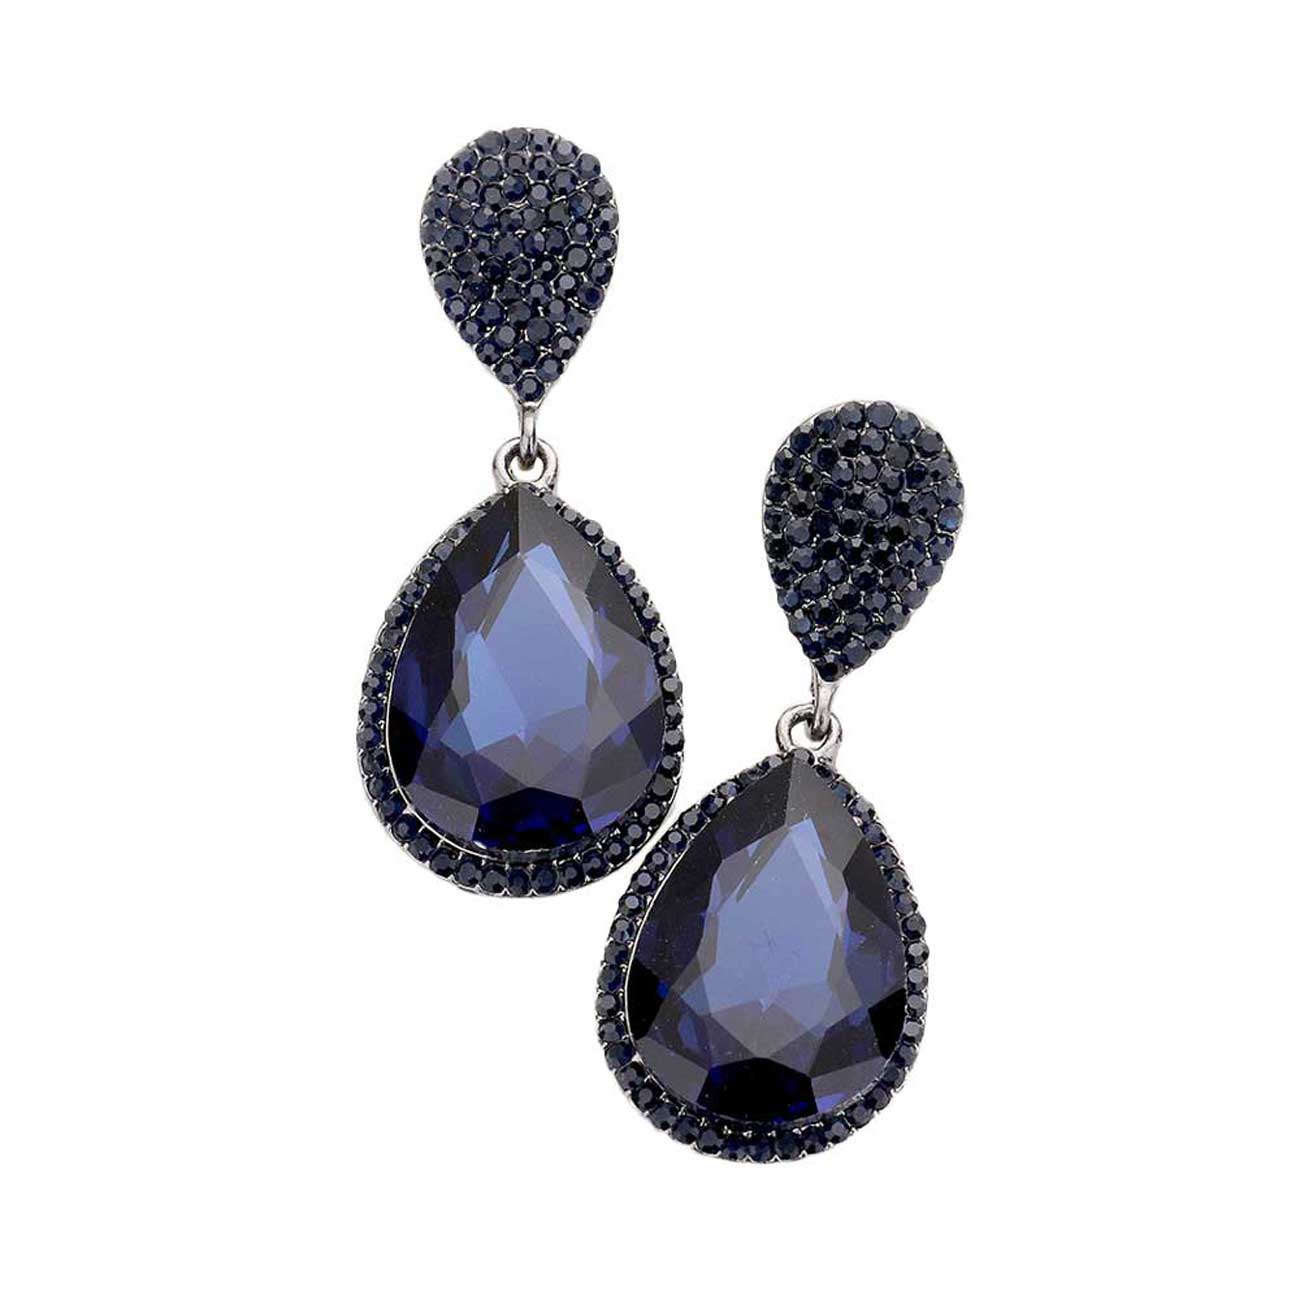 Montana Blue Glass Crystal Teardrop Rhinestone Trim Evening Earrings, put on a pop of color to complete your ensemble. Beautifully crafted design adds a gorgeous glow to any outfit. Perfect jewelry gift to expand a woman's fashion wardrobe with a modern, on trend style. Perfect for Birthday Gift, Anniversary Gift, Mother's Day Gift, Graduation Gift, Valentine's Day Gift.